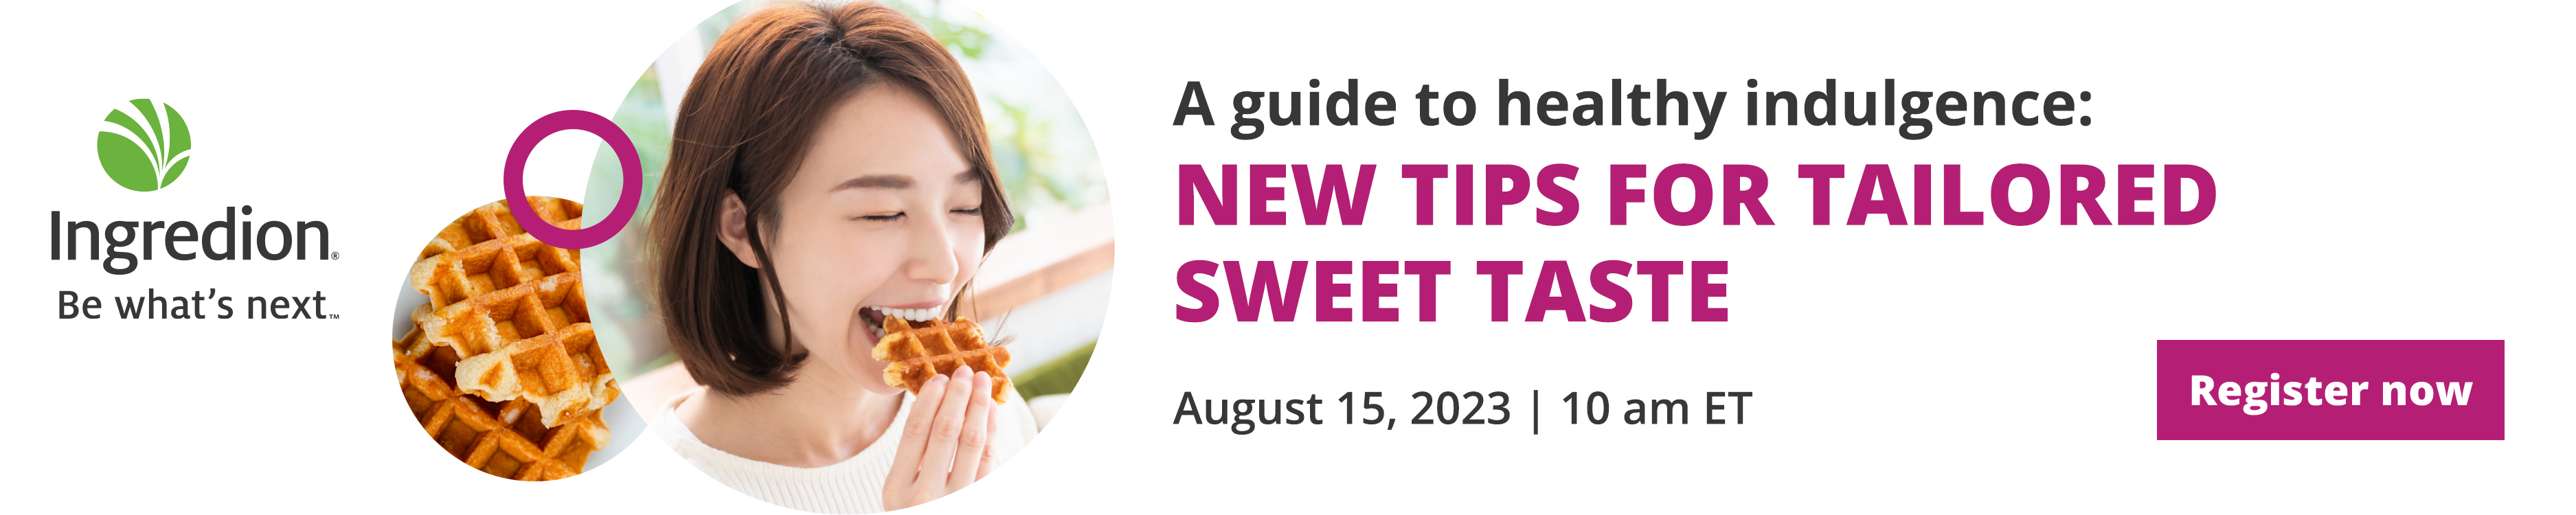 A guide to healthy indulgence: New tips for tailored sweet taste